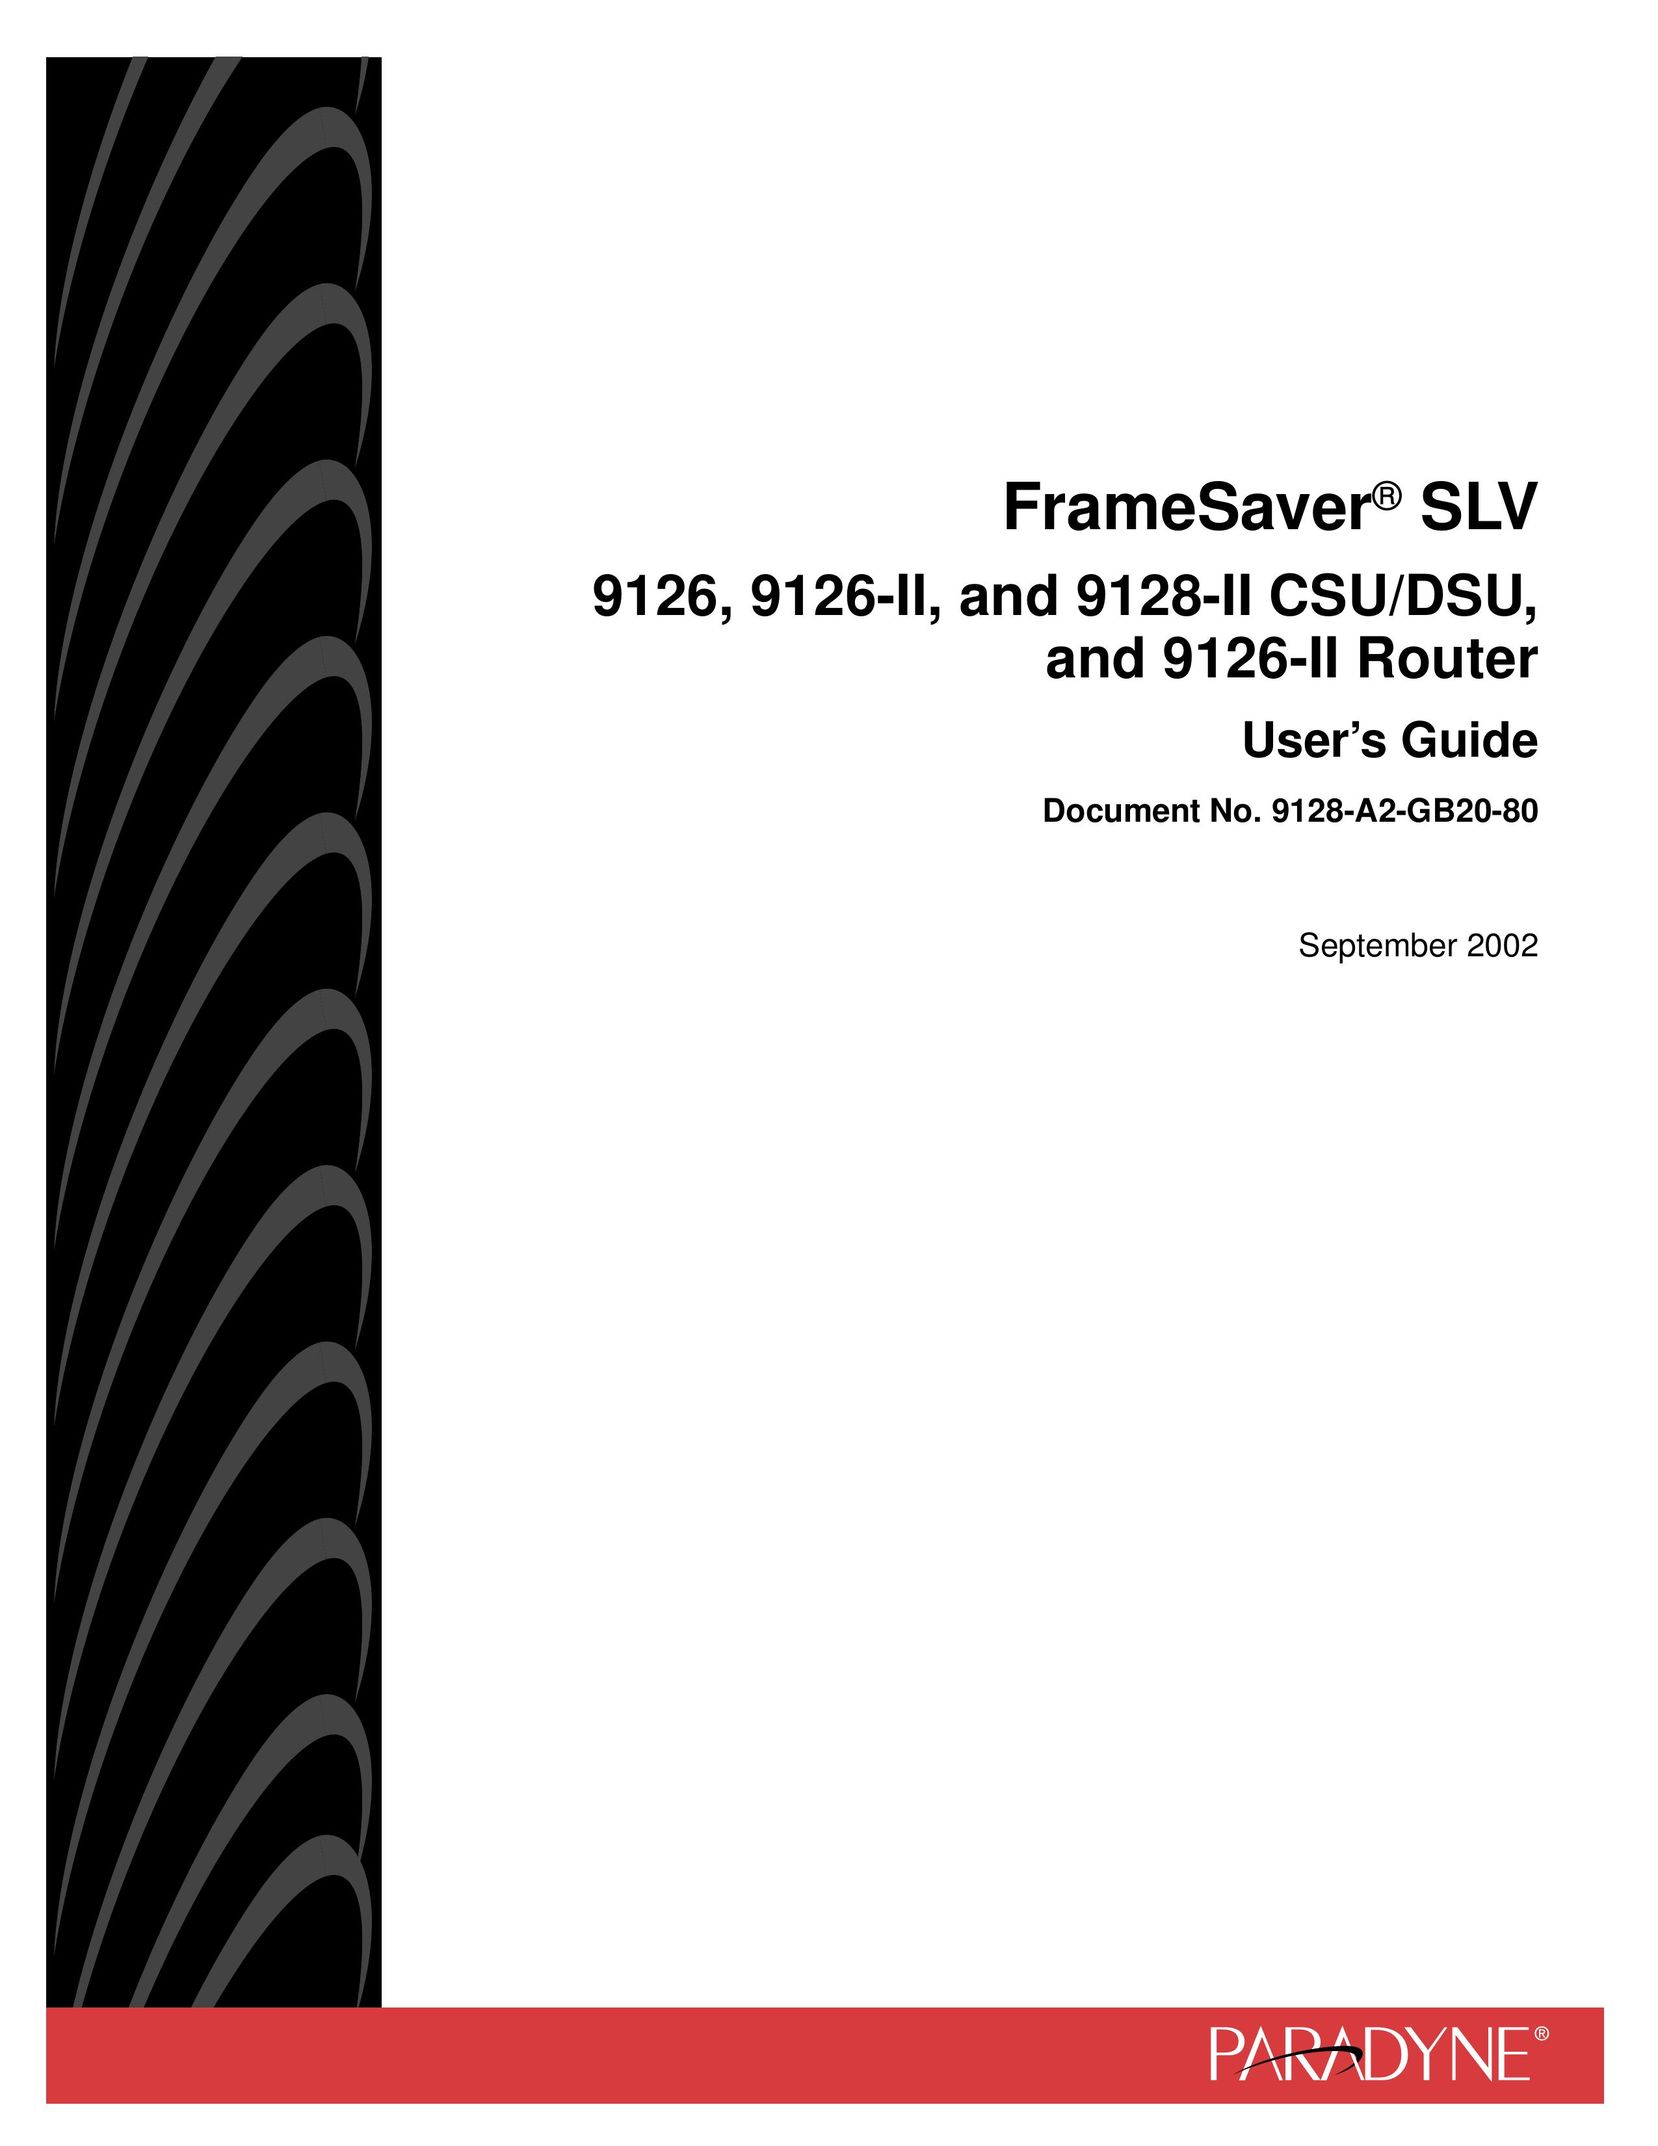 Paradyne 9128-II Network Router User Manual